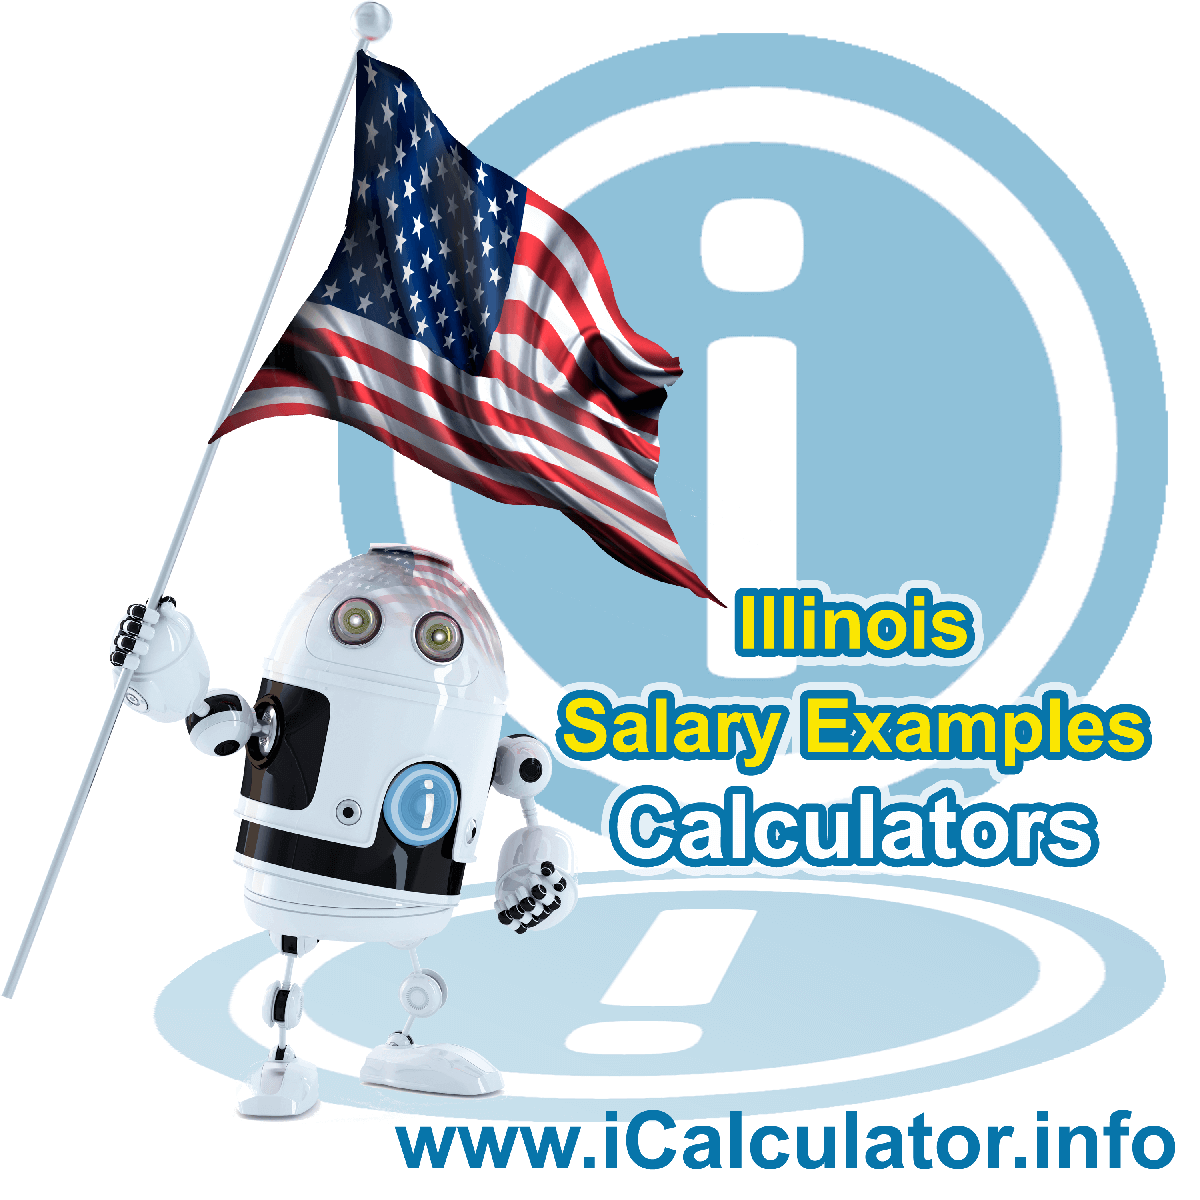 Illinois Salary Example for $ 50,000.00 in 2023 | iCalculator™ | $ 50,000.00 salary example for employee and employer paying Illinois State tincome taxes. Detailed salary after tax calculation including Illinois State Tax, Federal State Tax, Medicare Deductions, Social Security, Capital Gains and other income tax and salary deductions complete with supporting Illinois state tax tables 